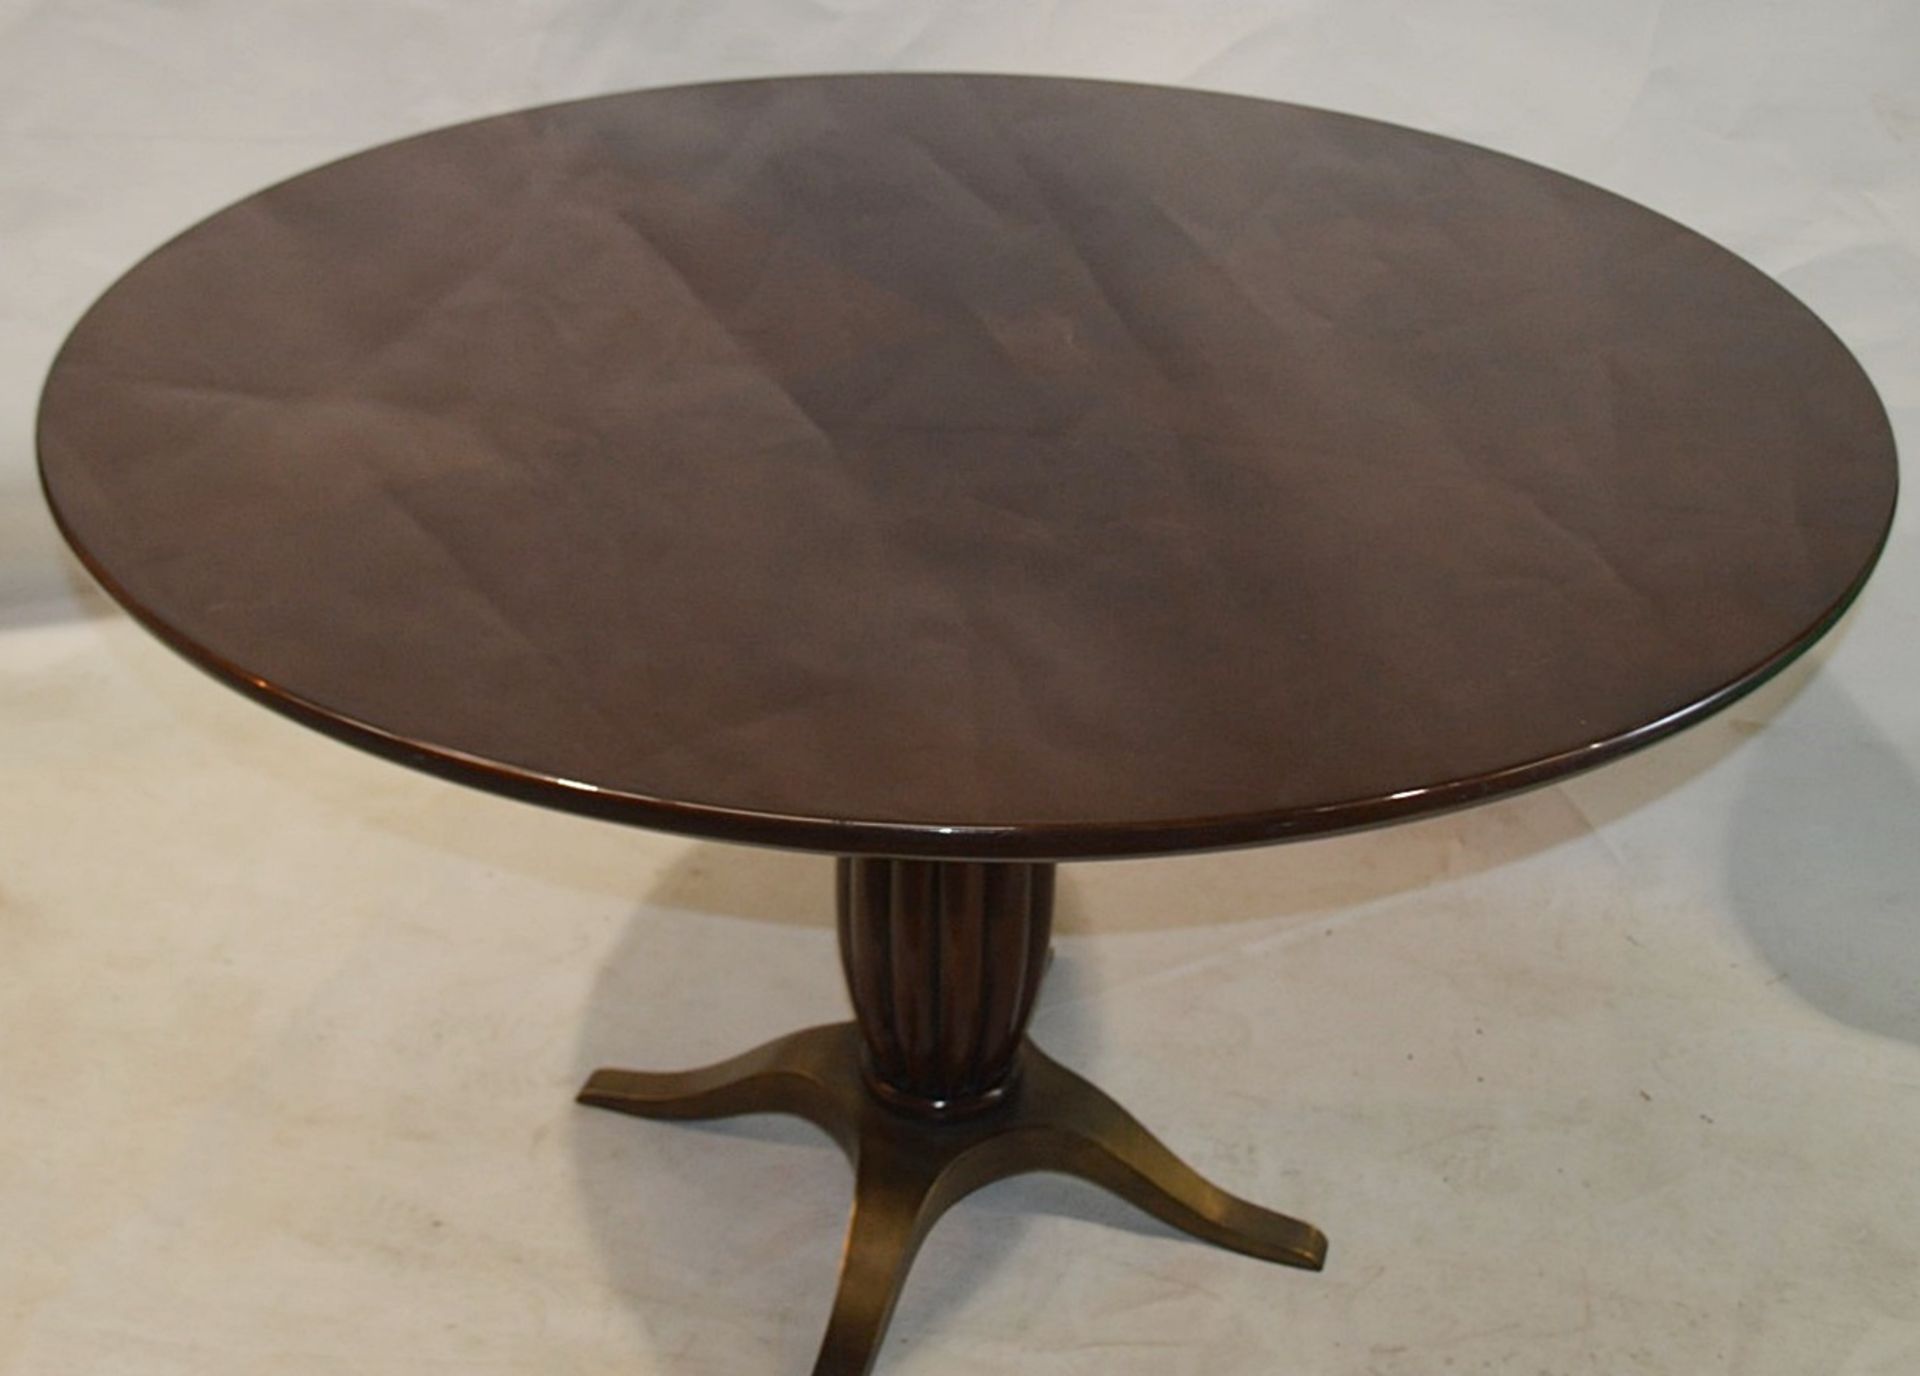 1 x Christopher Guy 'Toulouse' Round Georgian-Style Restaurant Dining Table - Original RRP £4,600.00 - Image 3 of 9